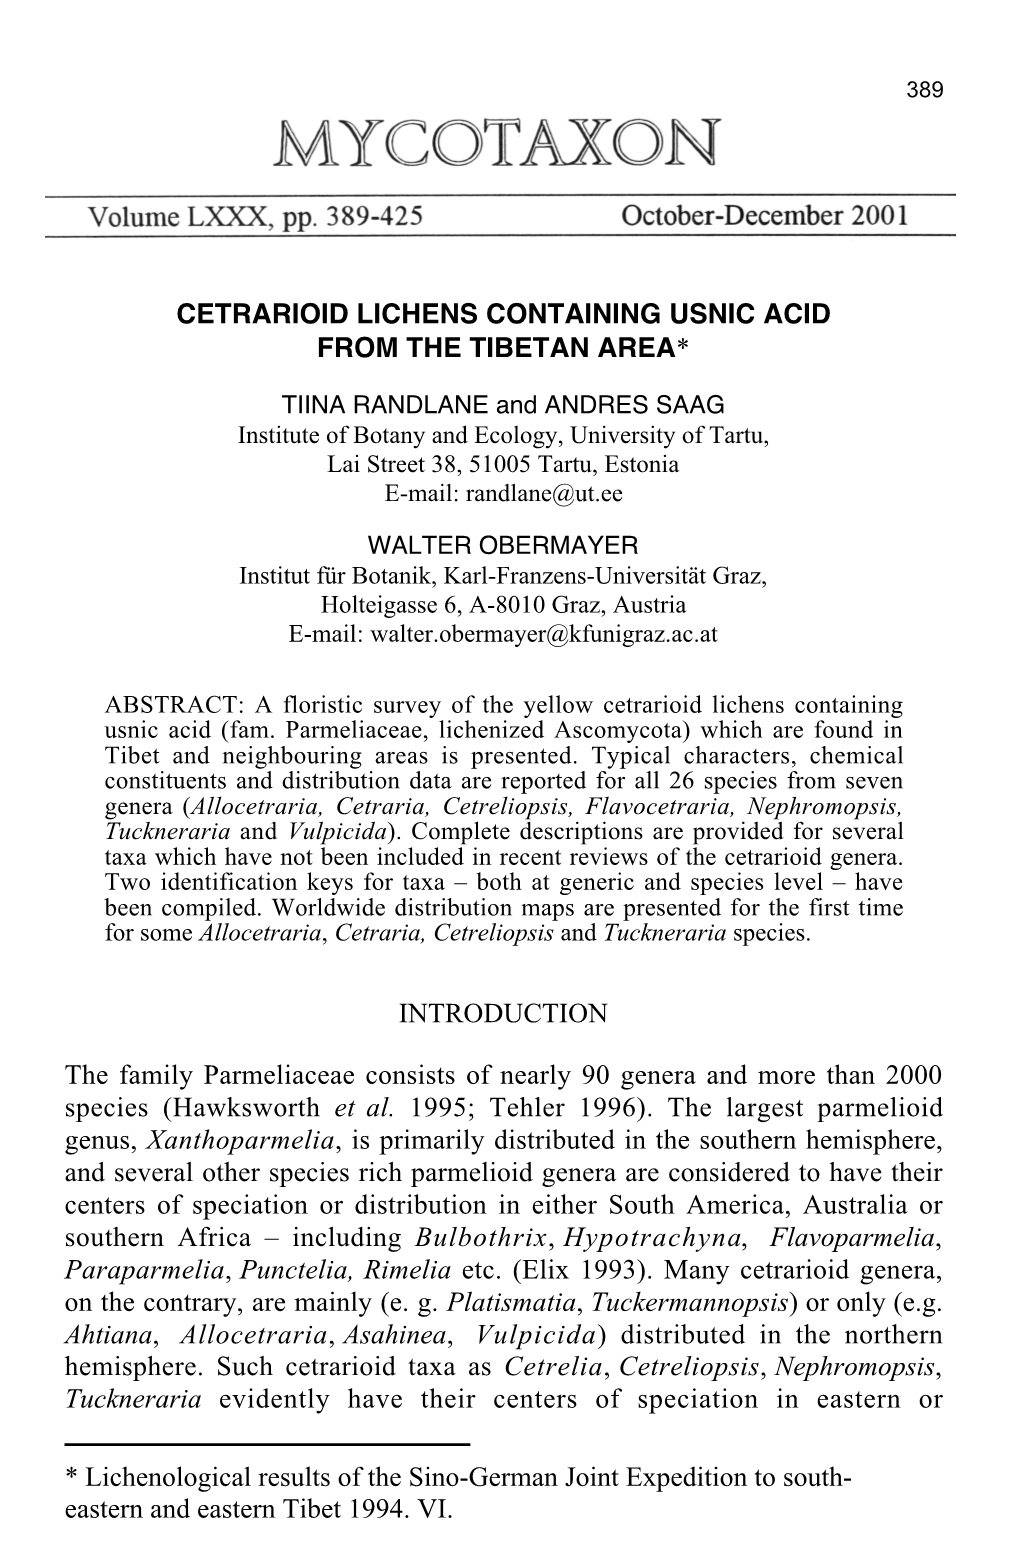 Cetrarioid Lichens Containing Usnic Acid from the Tibetan Area*